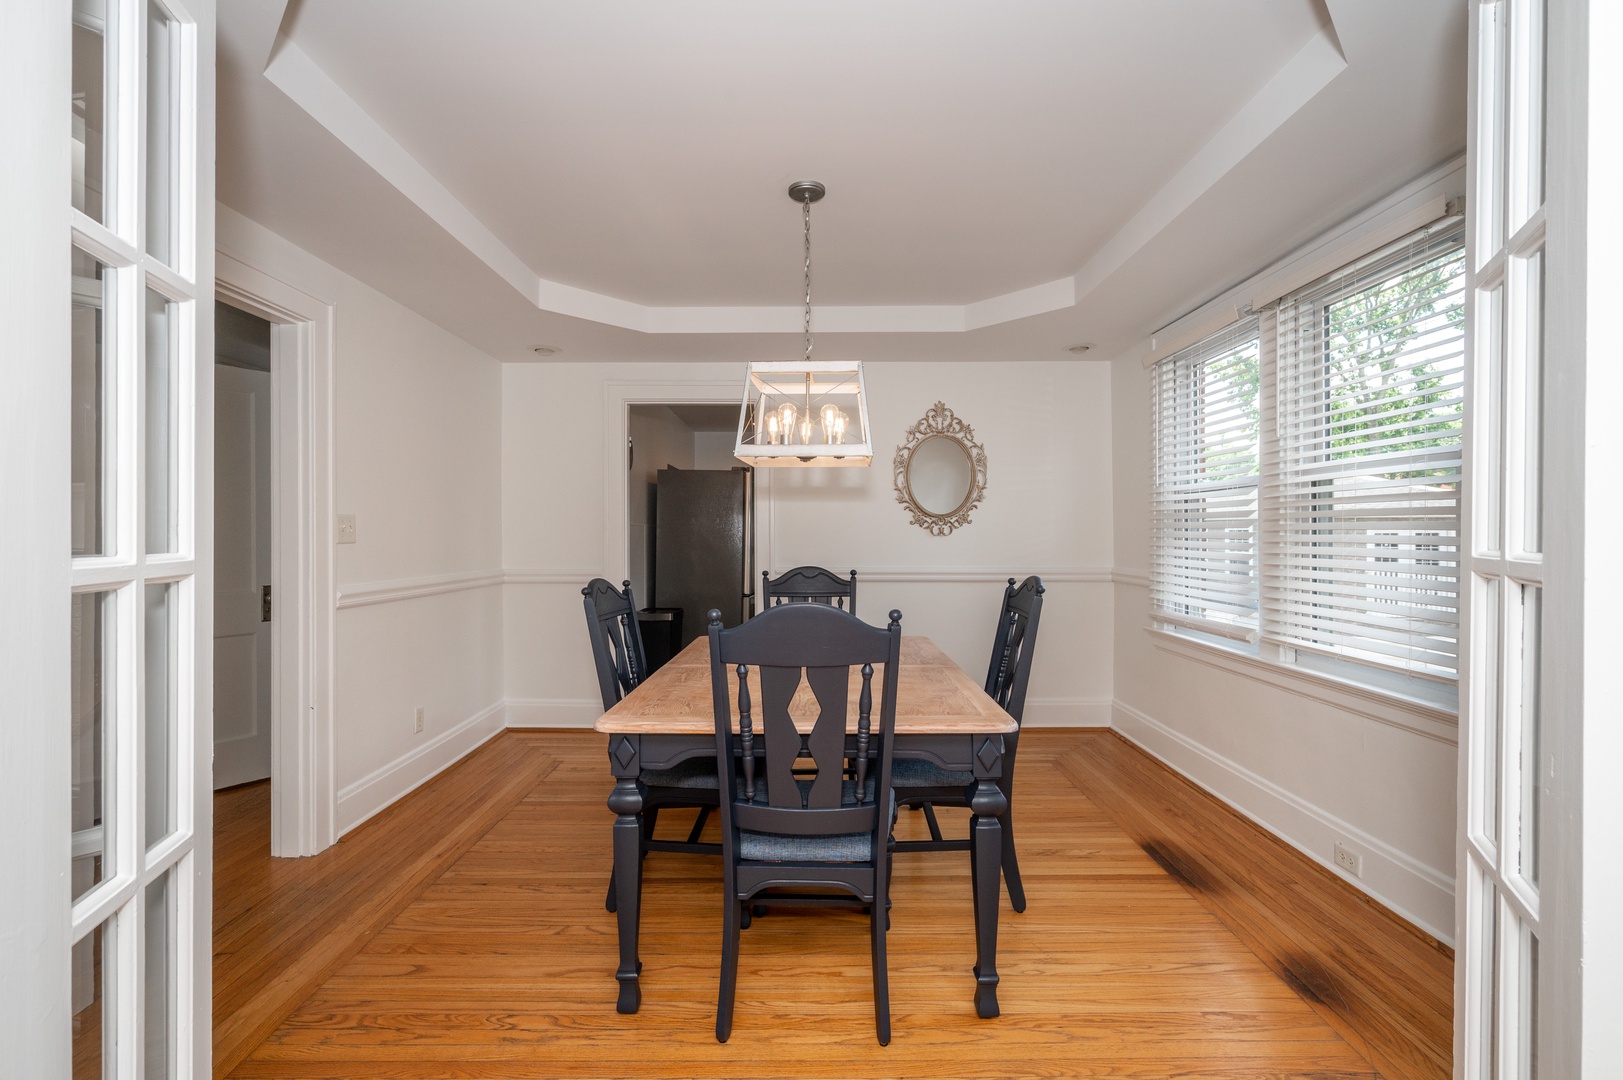 The chic formal dining room offers seating for 4